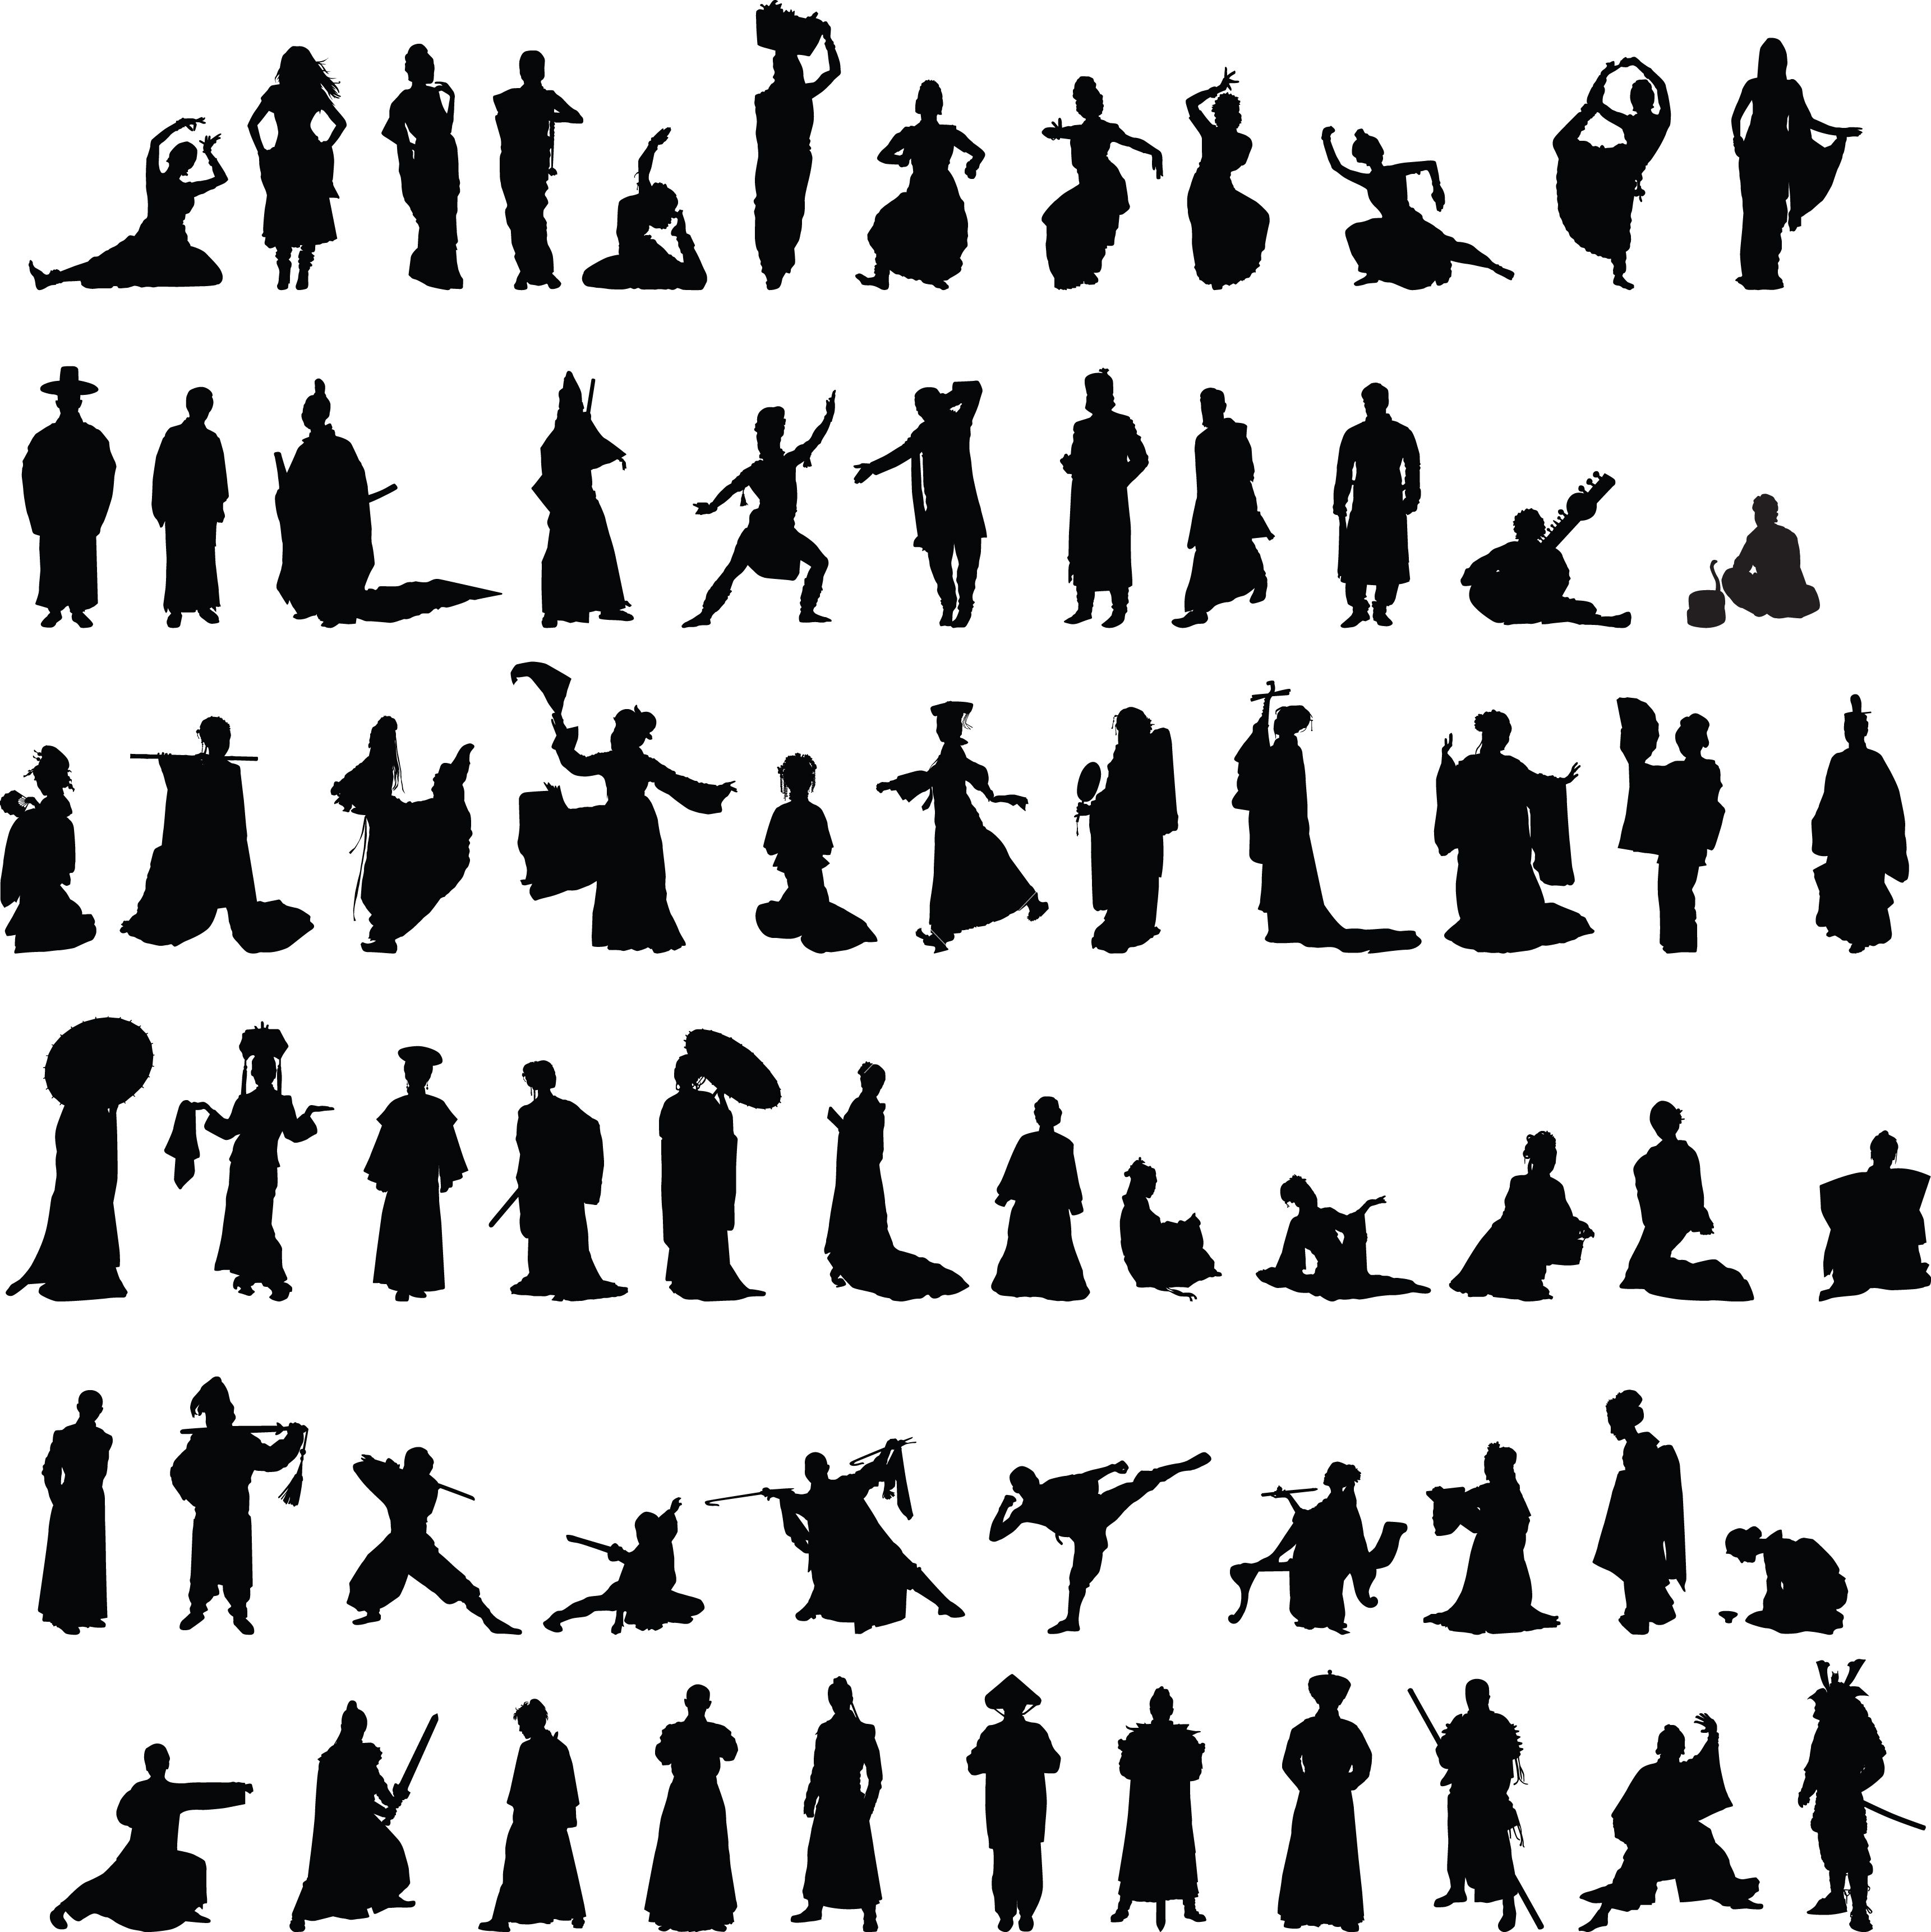 Silhouettes set vector by. Asian clipart silhouette